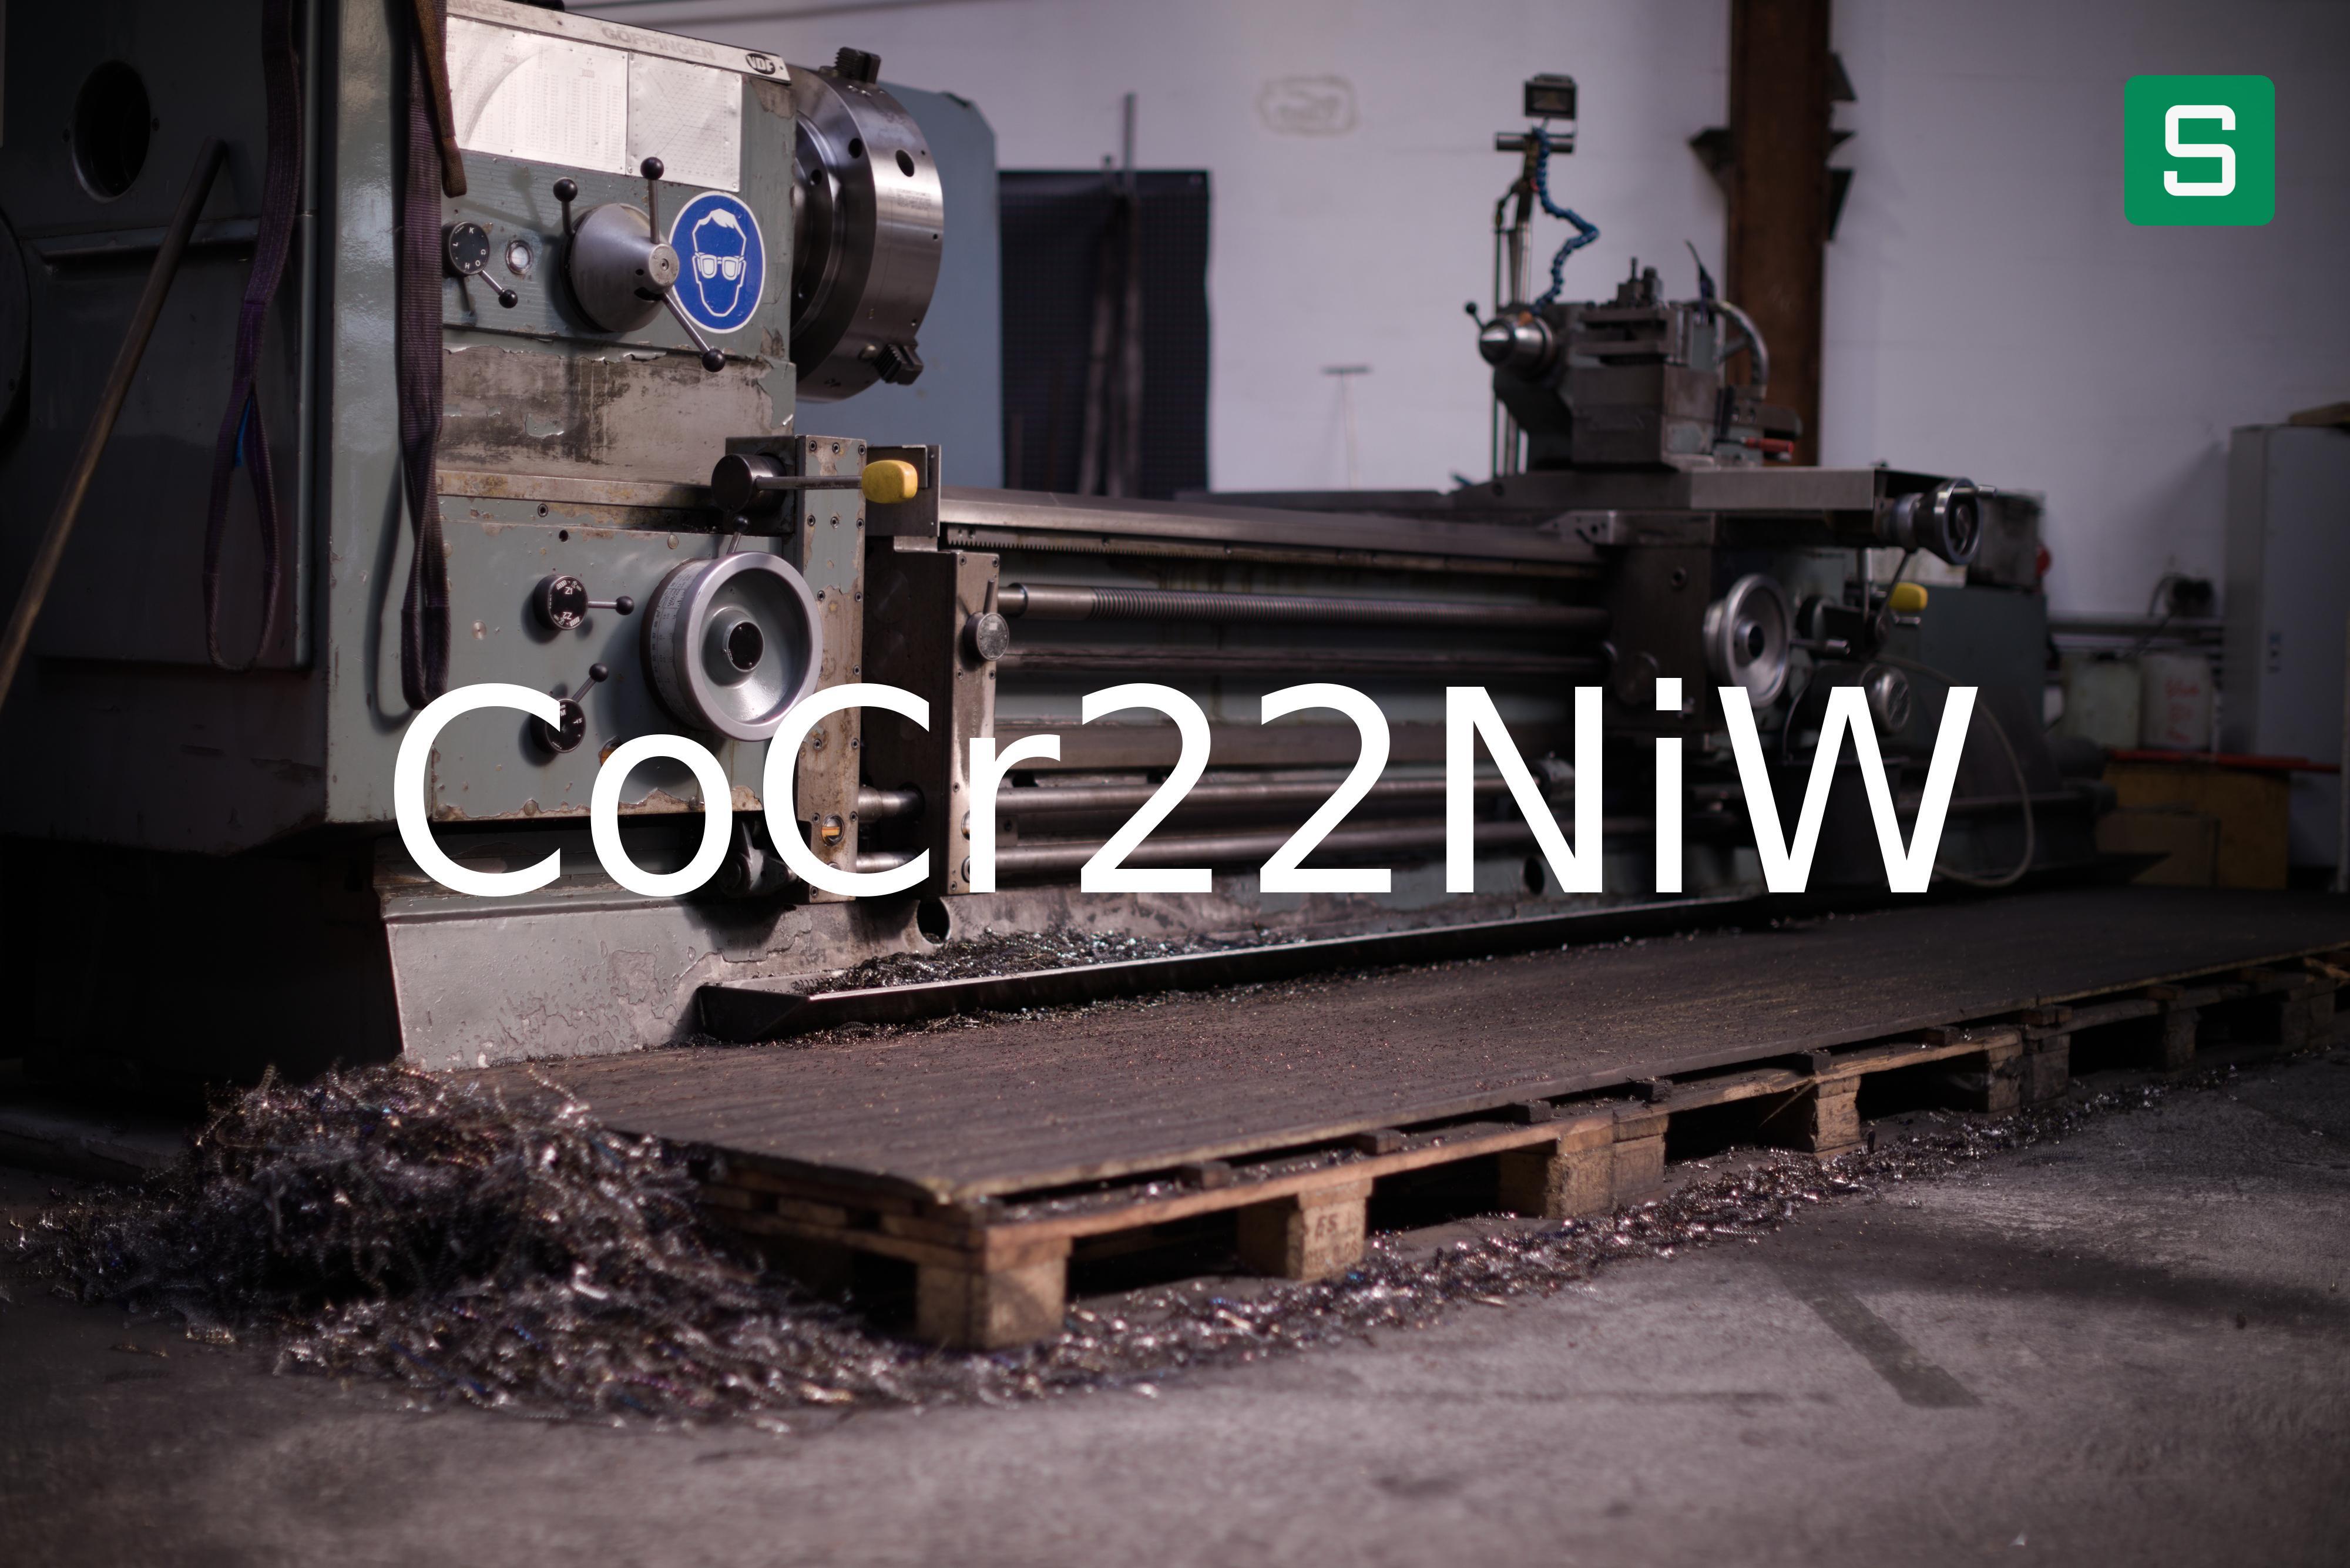 Steel Material: CoCr22NiW